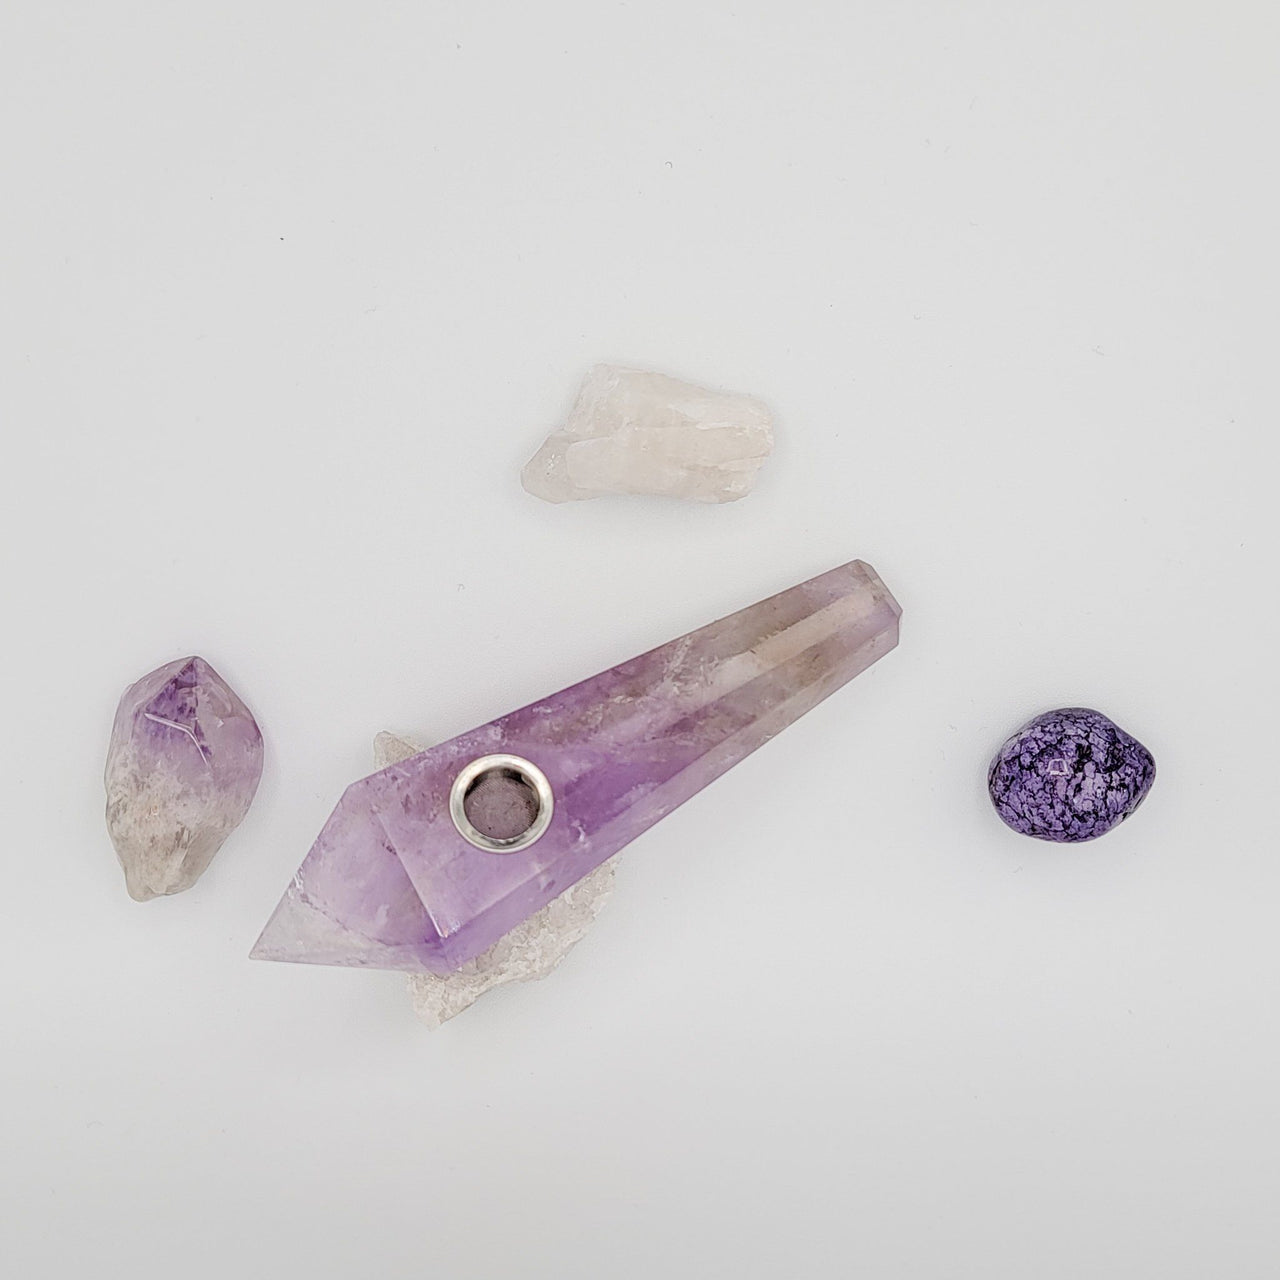 Amethyst Pipe, check also our obsidian pipe. crystal pipes are intended for any use you feel like